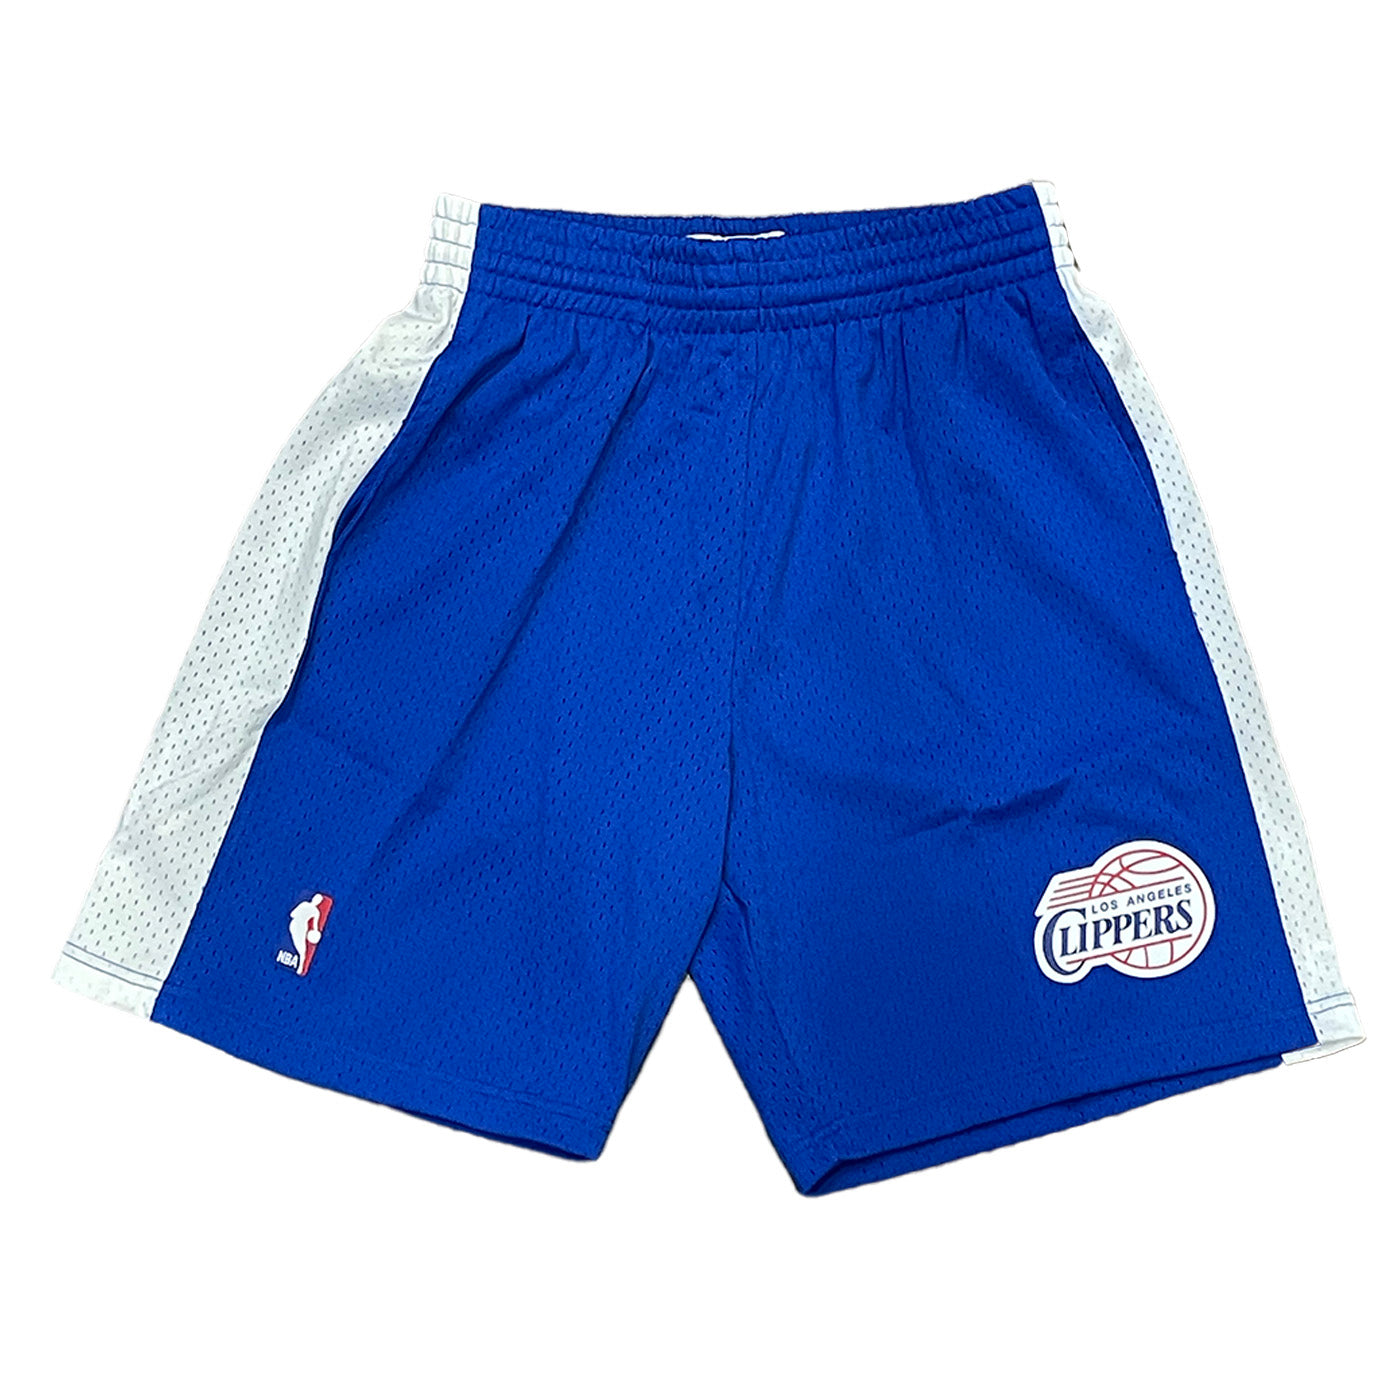 La Clippers Shorts / Nba City Edition 2019 Checkout The New Clippers ...